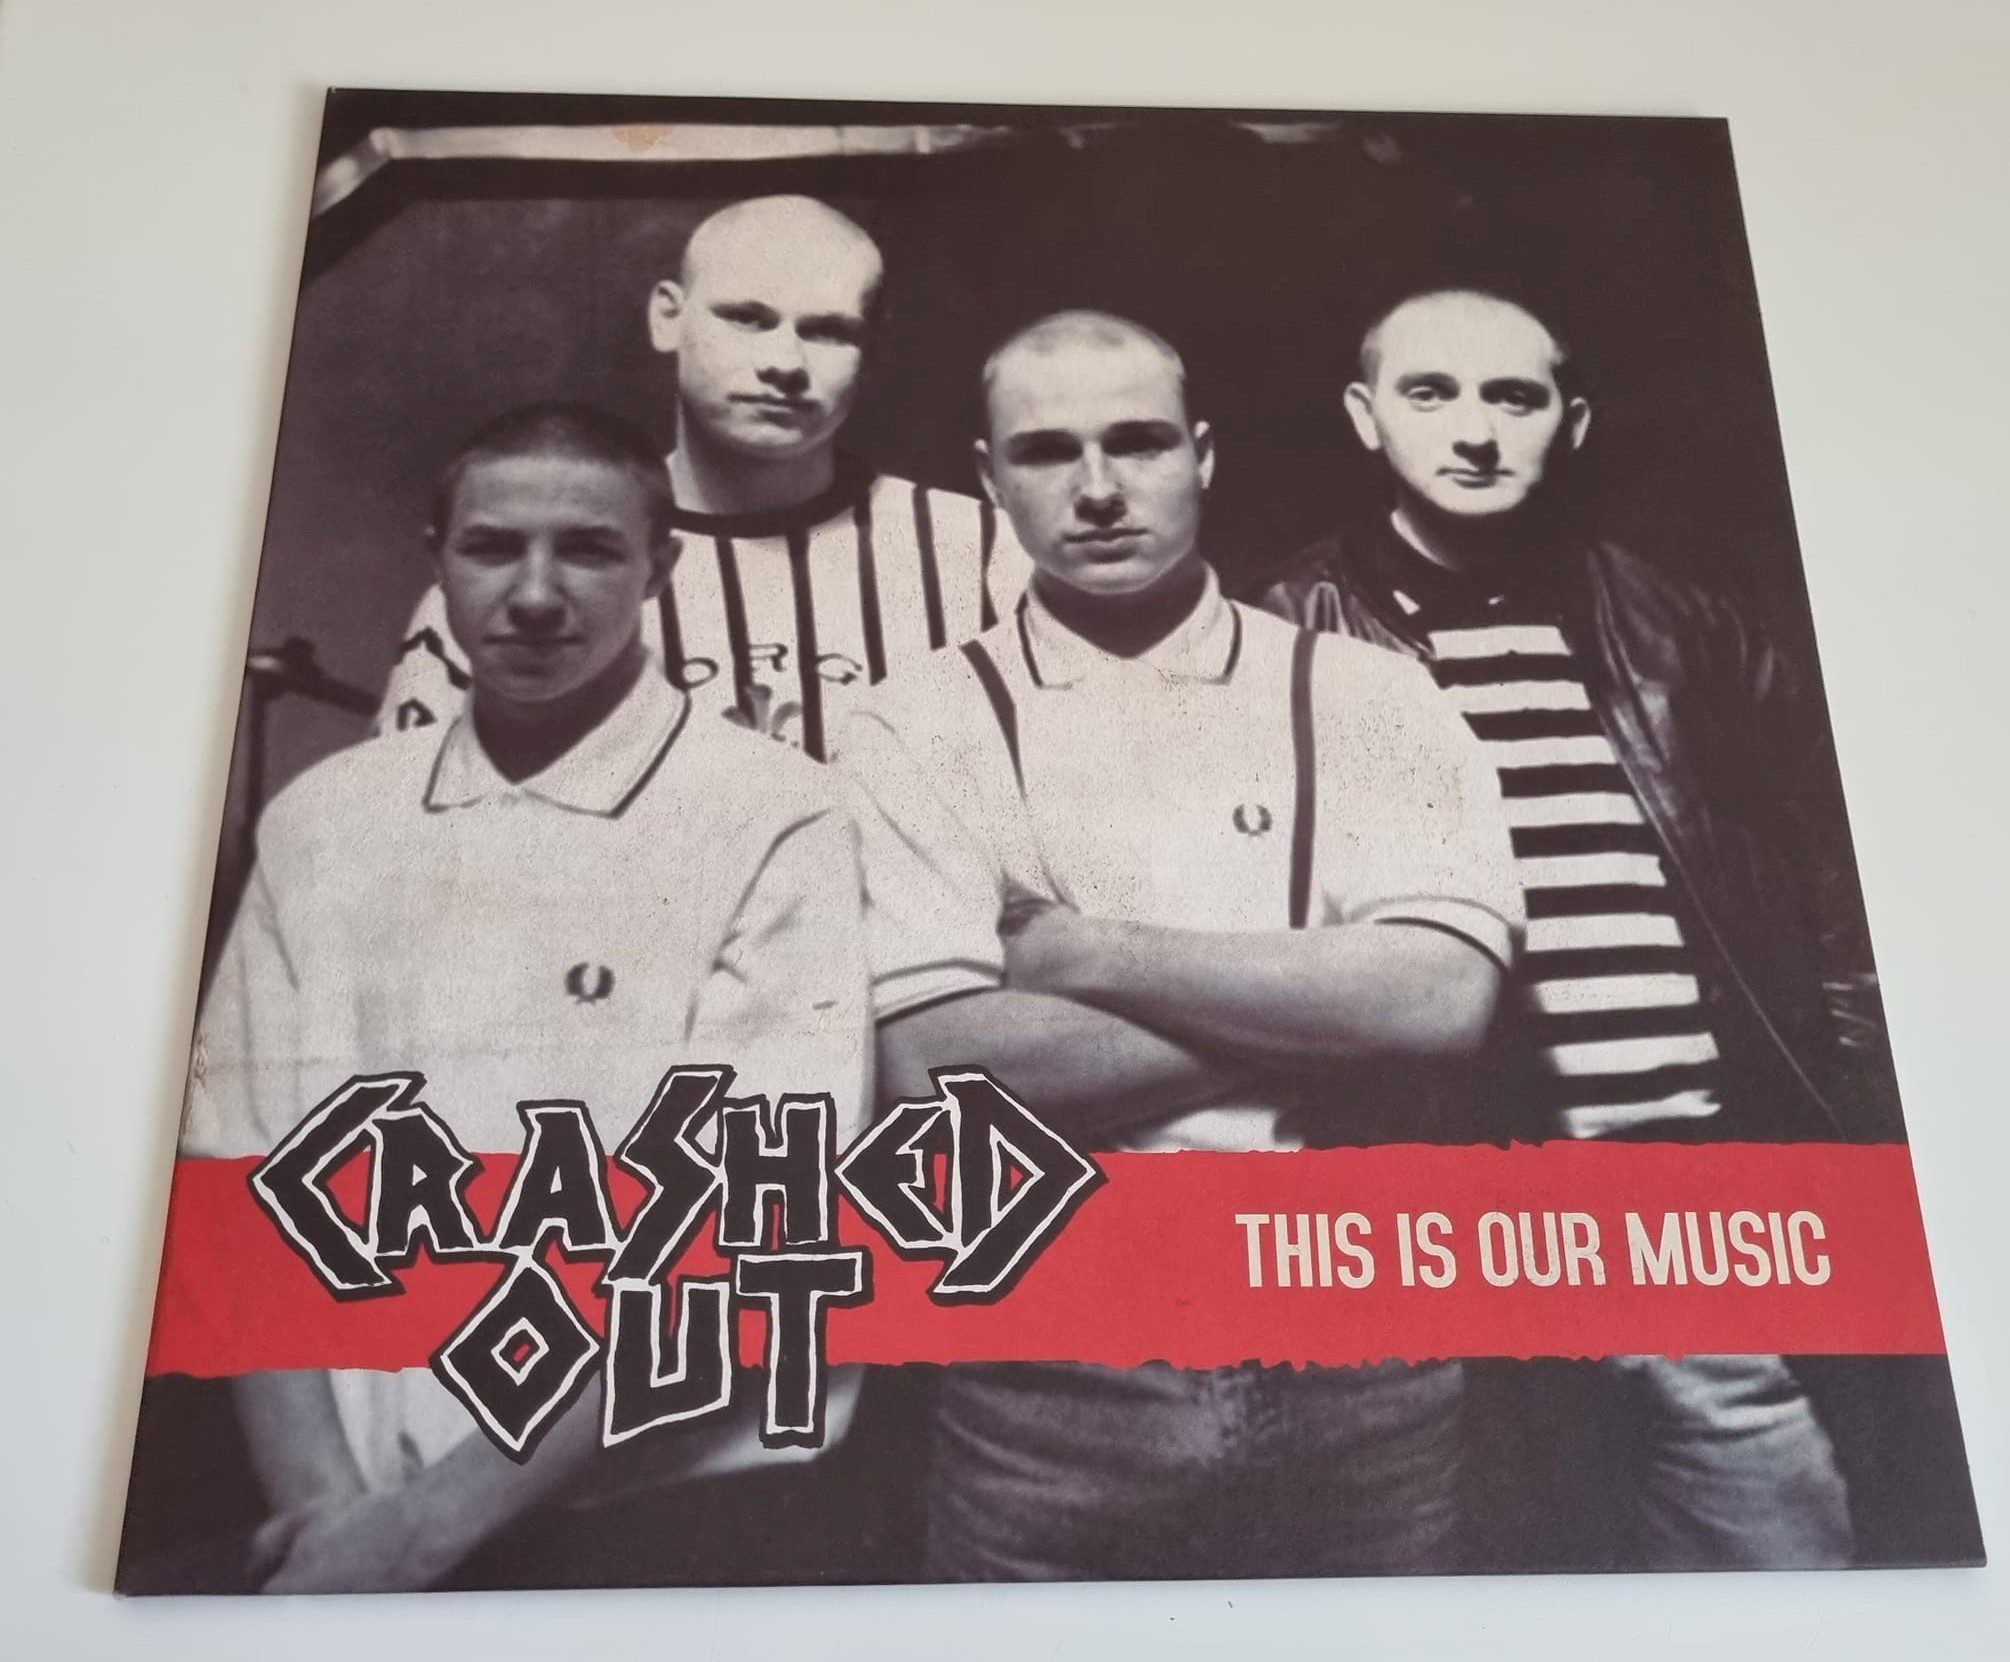 Buy this rare Crashed Out record by clicking here